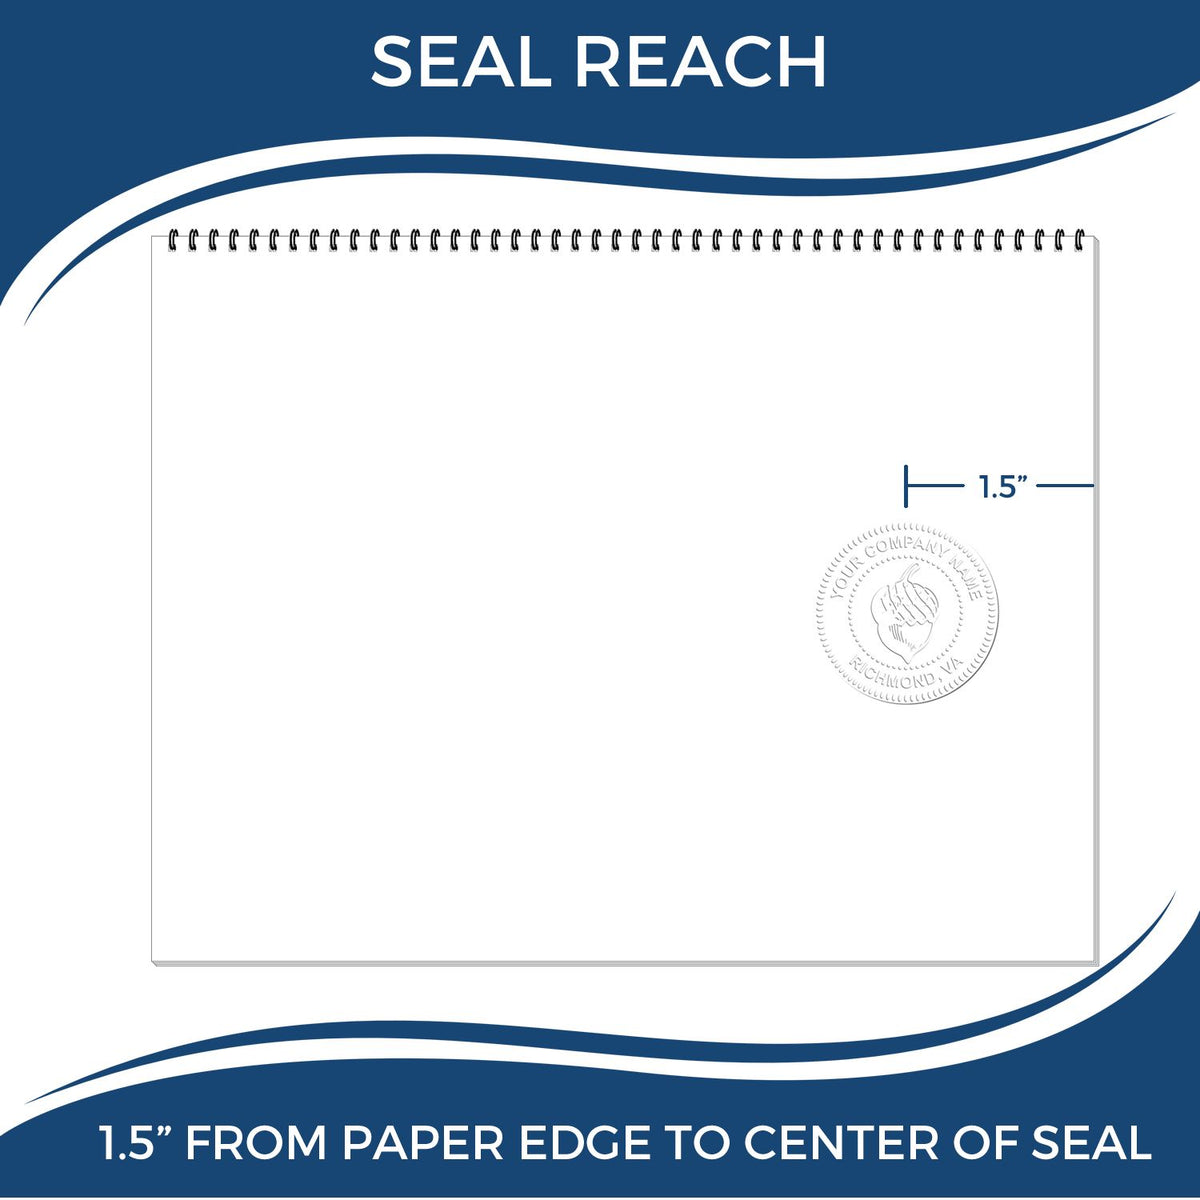 An infographic showing the seal reach which is represented by a ruler and a miniature seal image of the Gift Colorado Geologist Seal